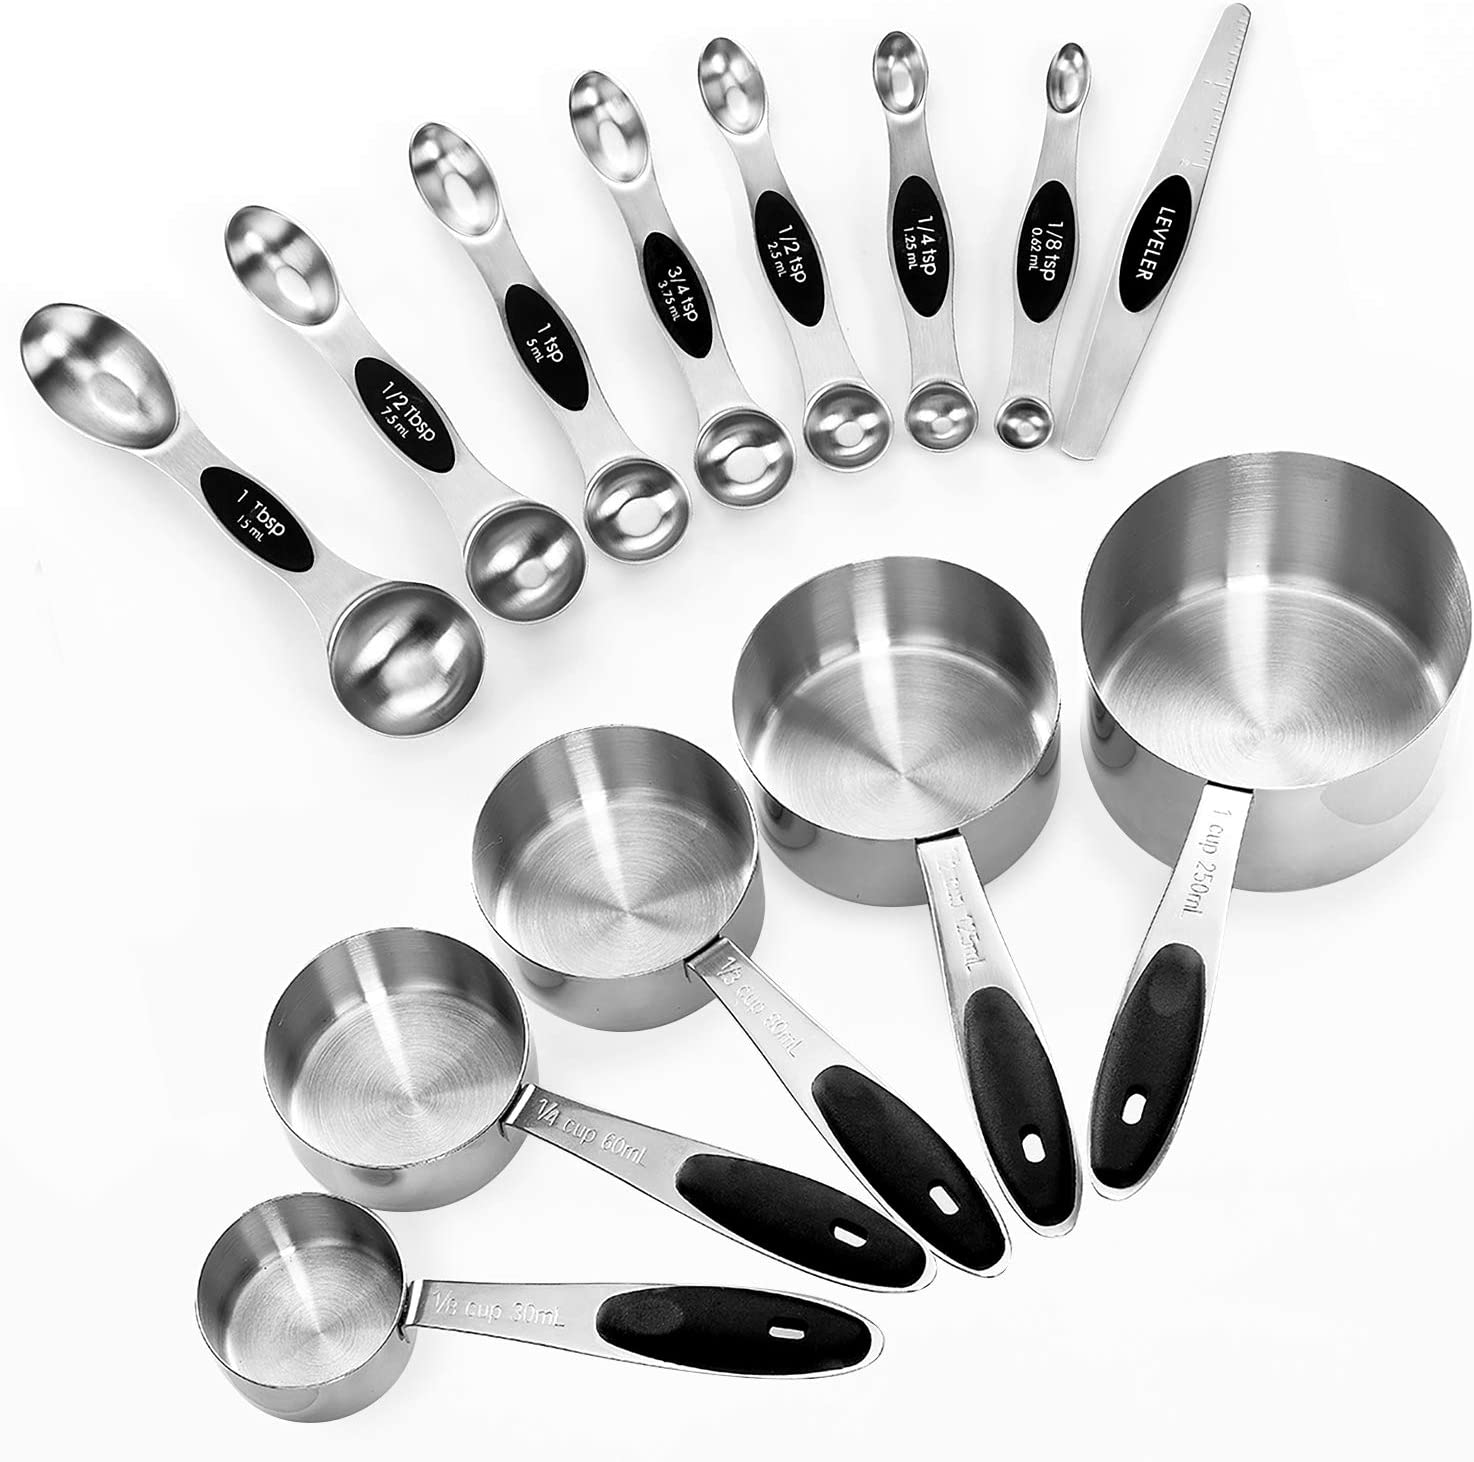 Measuring Cups and Magnetic Measuring Spoons Set, Stainless Steel 5 Cups and 7 Spoons and 1 Levele